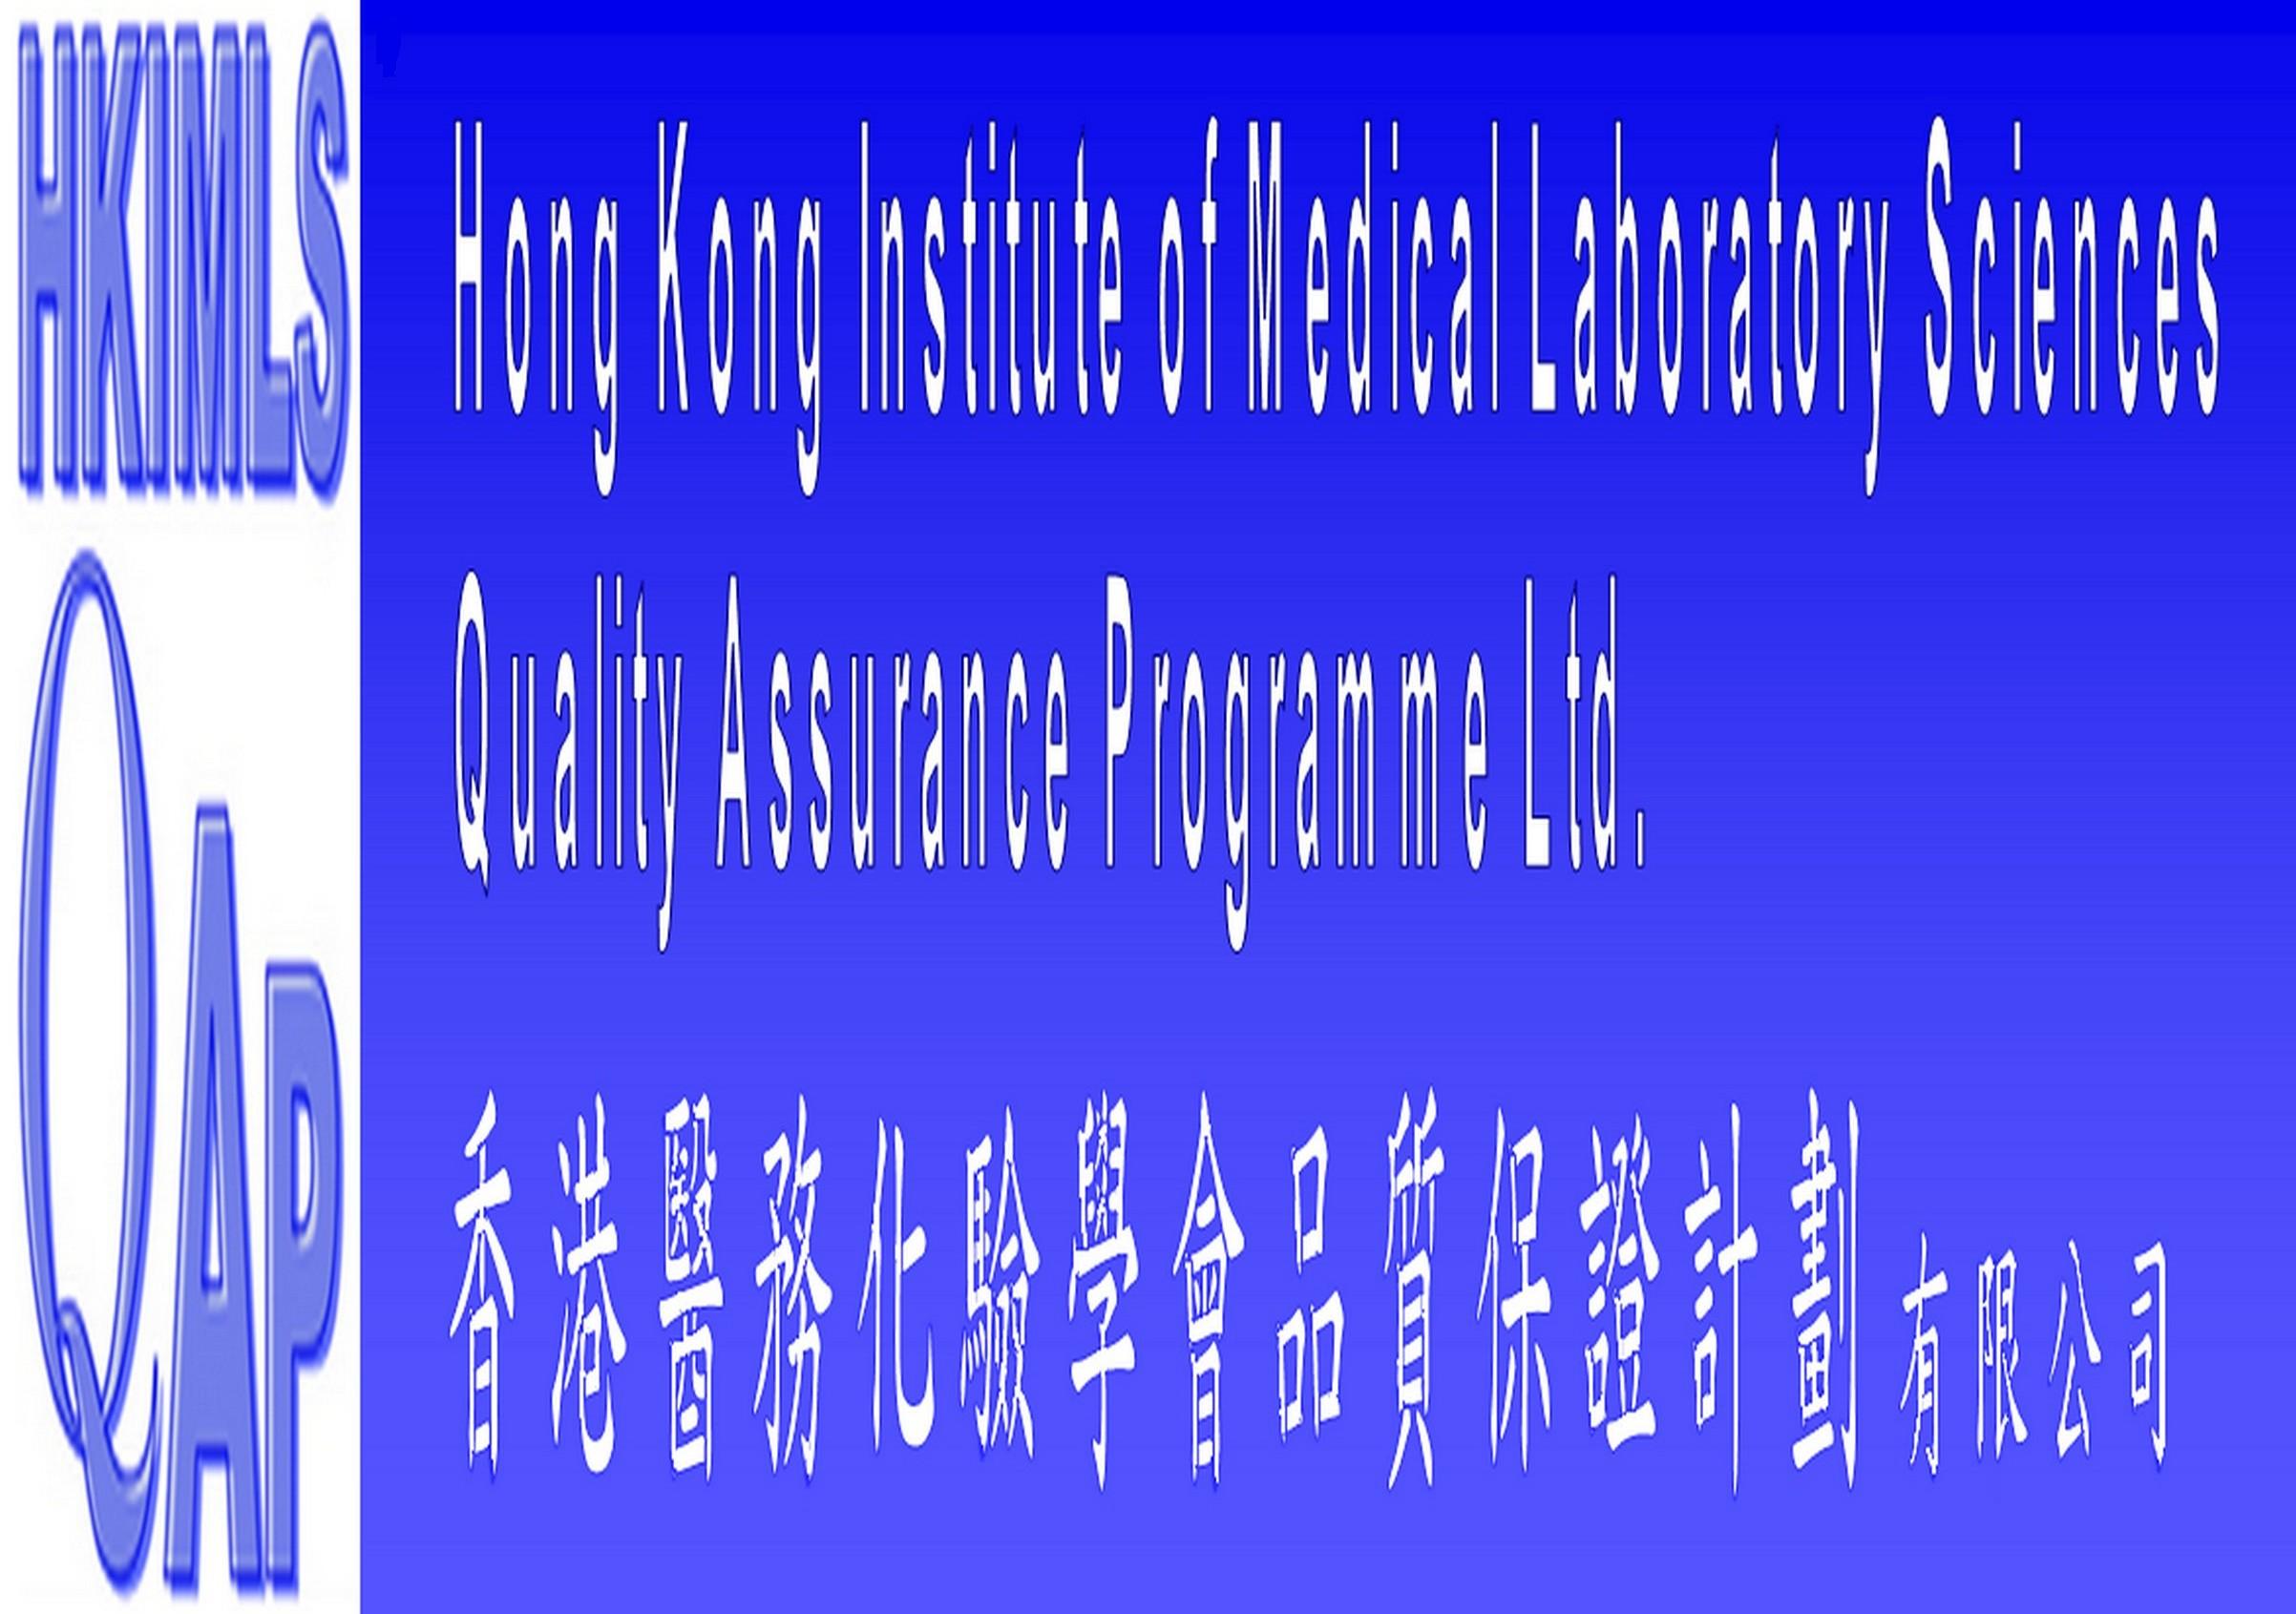 Hong Kong Institute of Medical Laboratory Sciences Quality Assurance Programme Ltd.